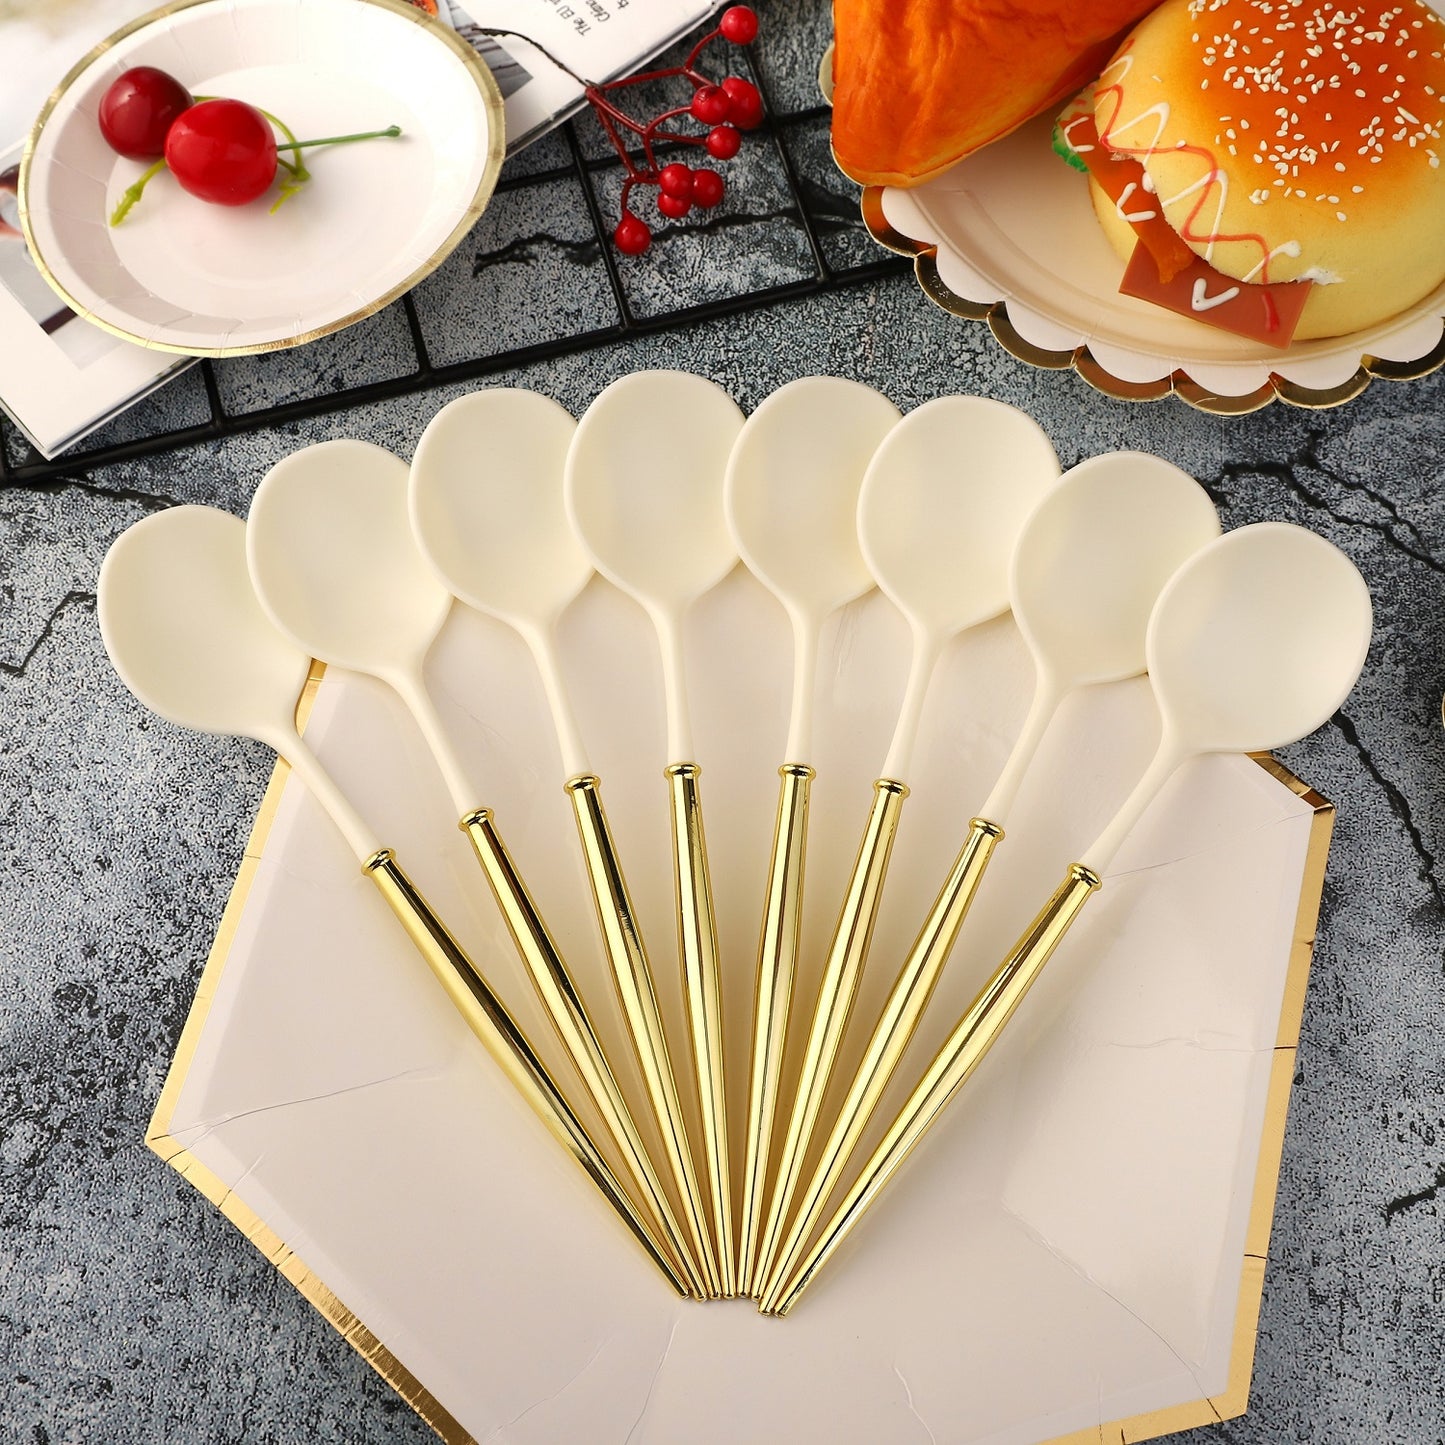 Golden White 8PCs Disposable Cutlery 20cm Plastic Knife Forks Spoons Party Supplies Decoration For Camping BBQ Wedding Outdoor Birthday